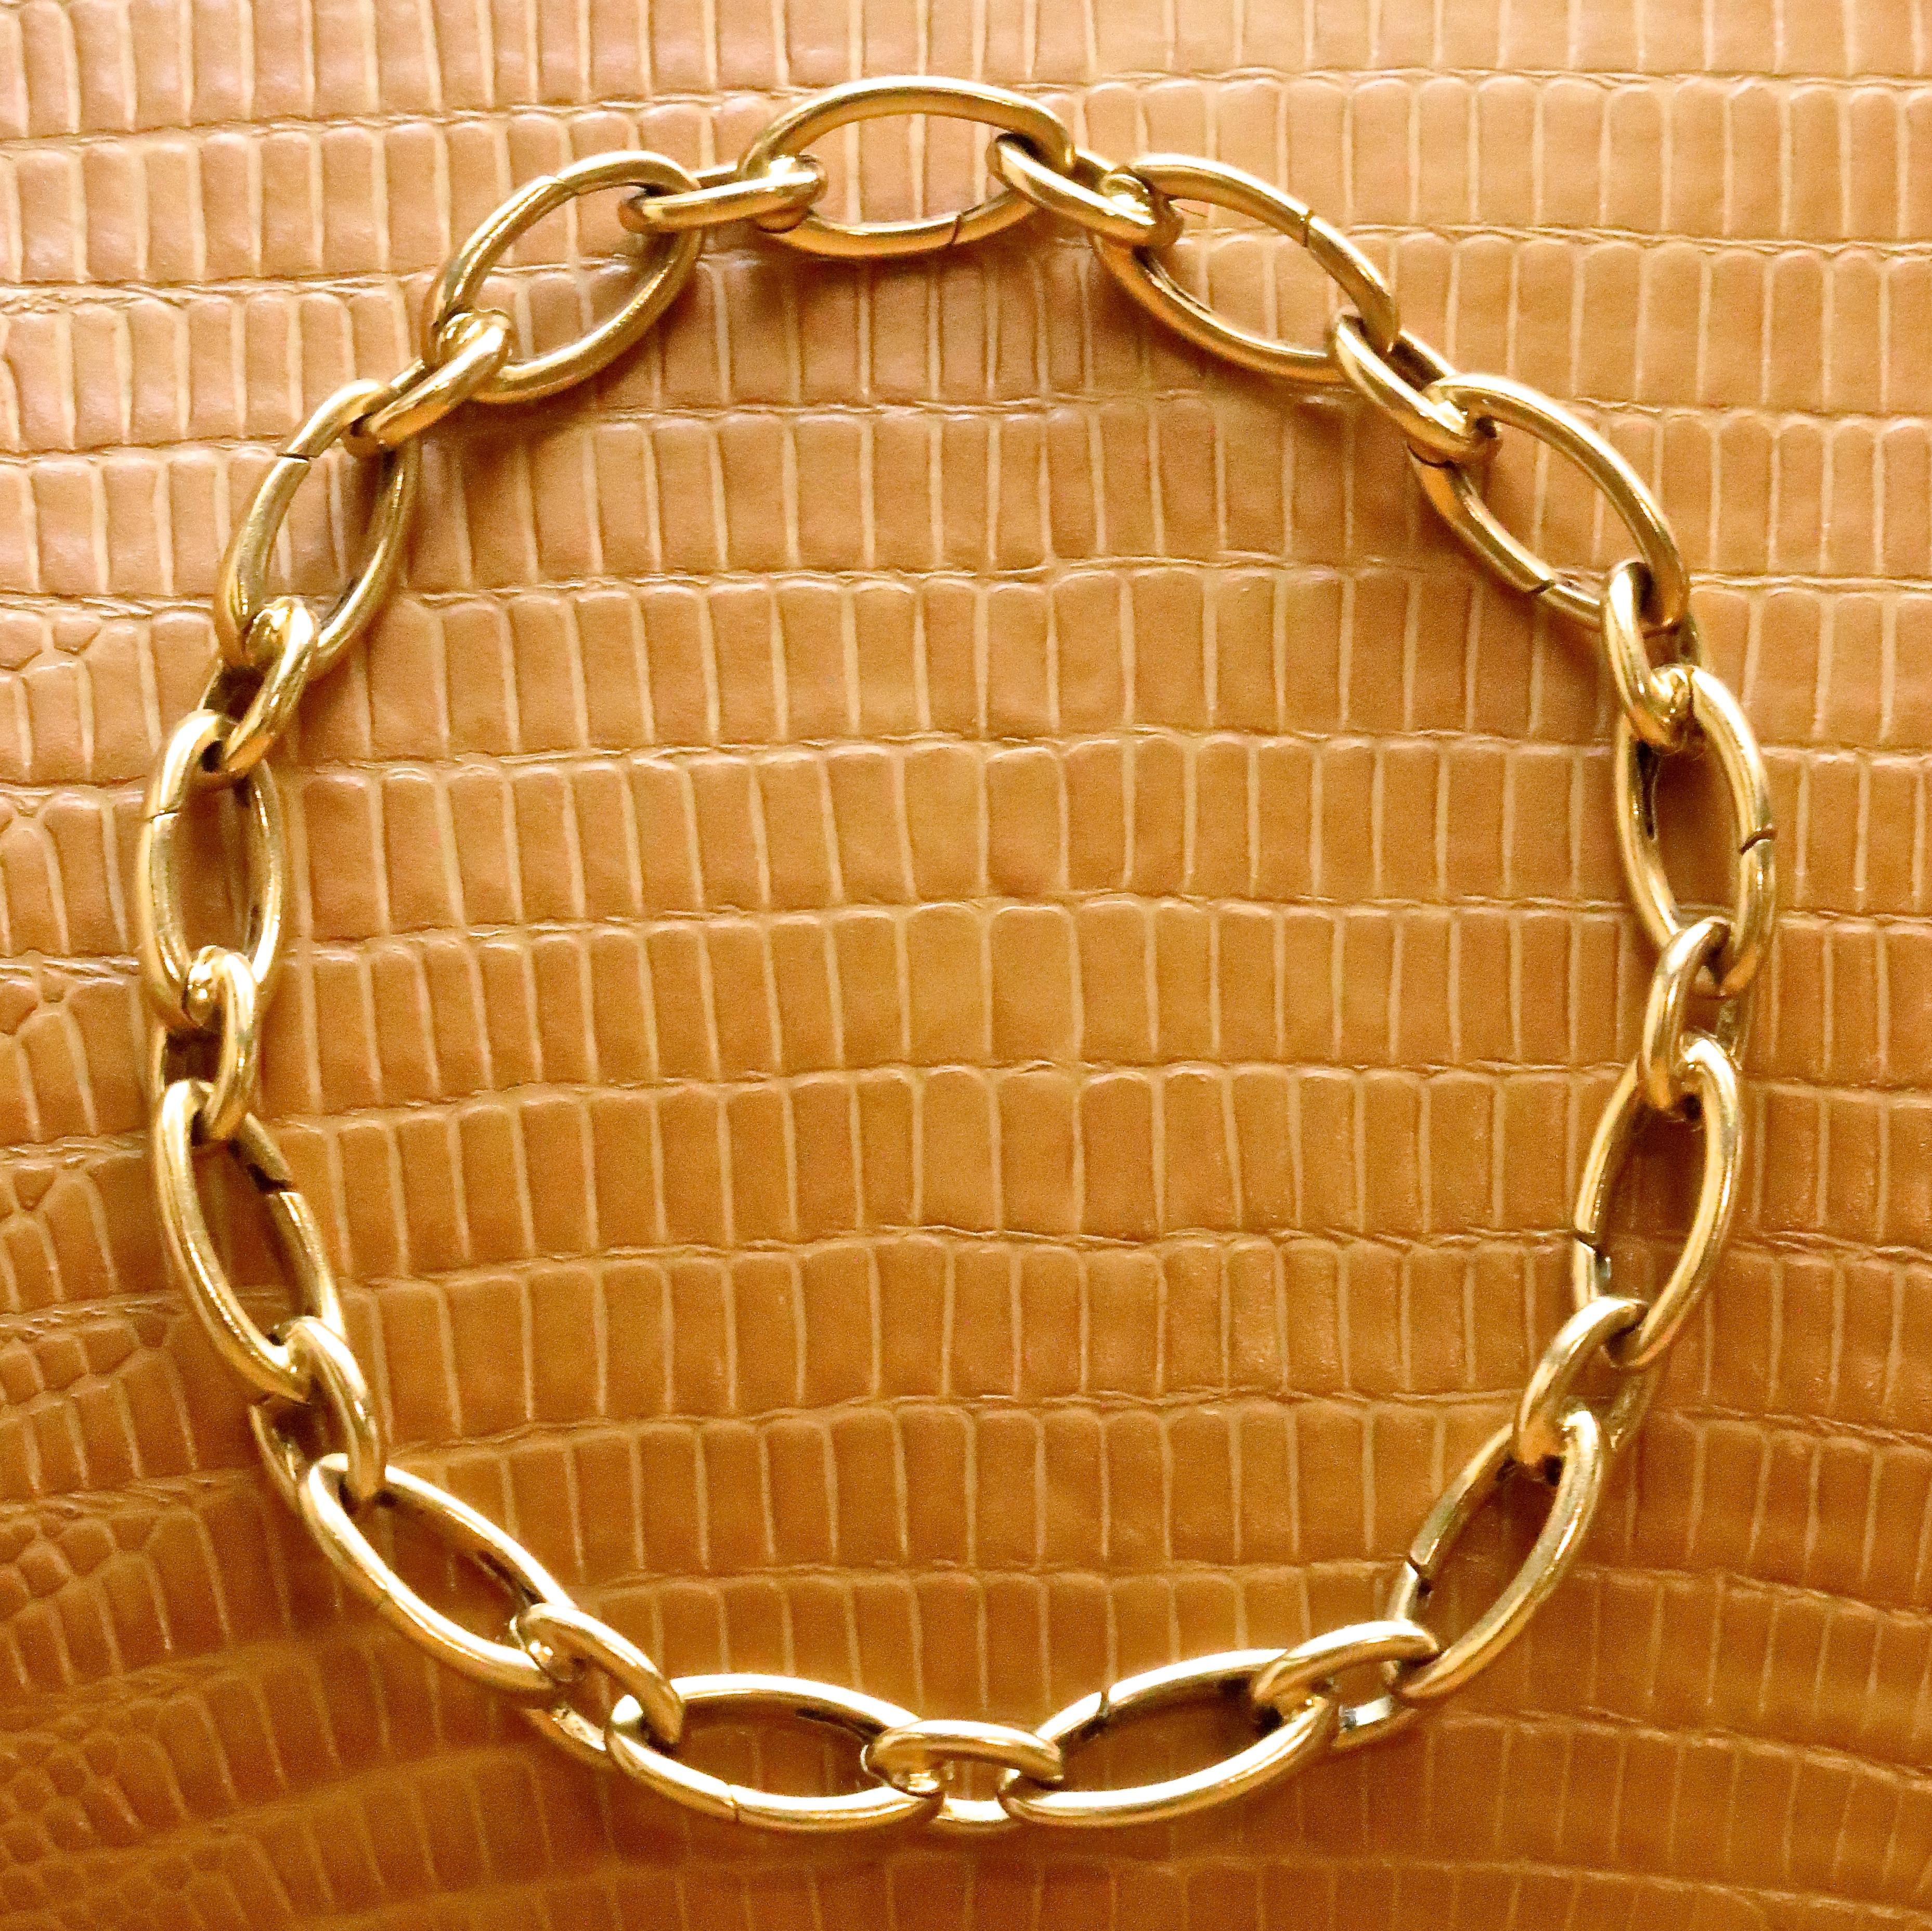 Classic and timeless, this vintage Tiffany & Co. bracelet is a perfect everyday accessory. Wear it with jeans and sweater or a beautiful evening dress; you will not go wrong. Alternating opening elongated oval links. Hallmarked Tiffany & Co, Italy.